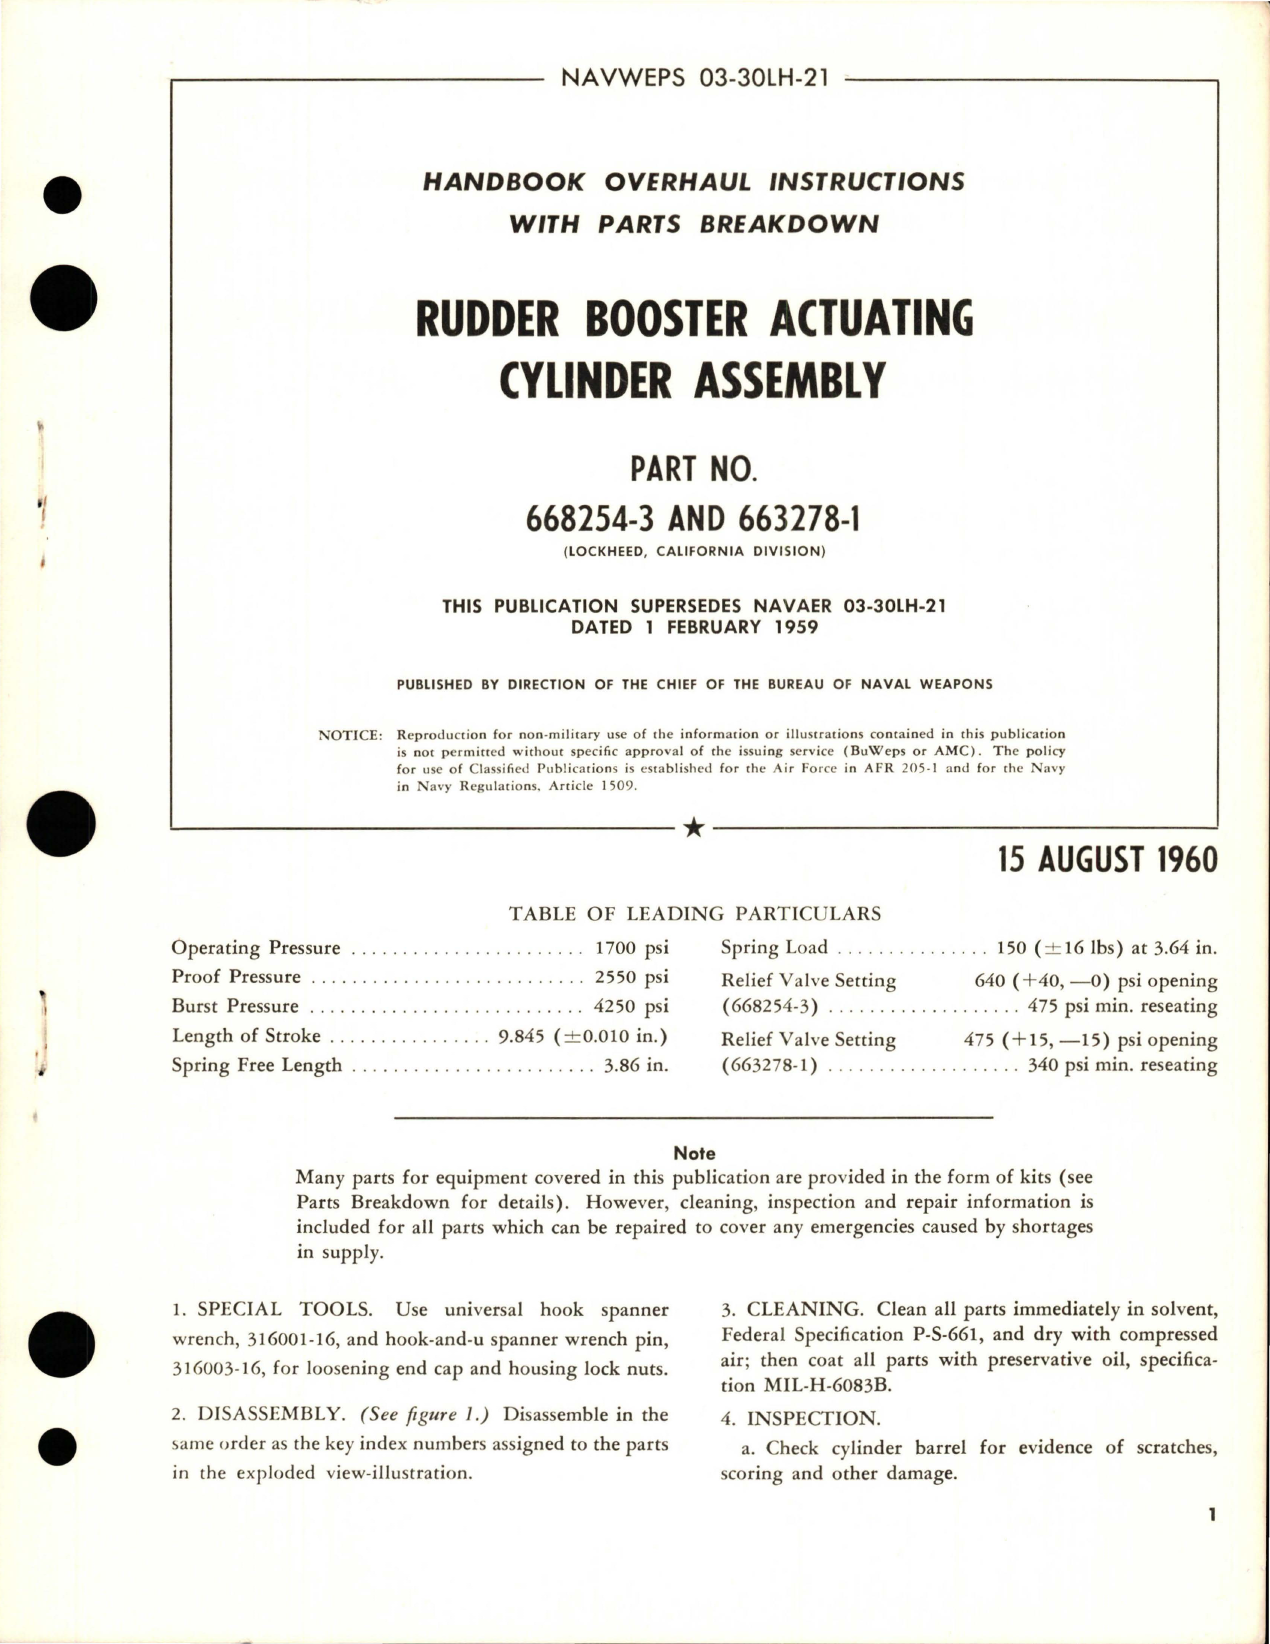 Sample page 1 from AirCorps Library document: Overhaul Instructions with Parts Breakdown for Rudder Booster Actuating Cylinder Assembly - Part 668254-3 and 663278-1 